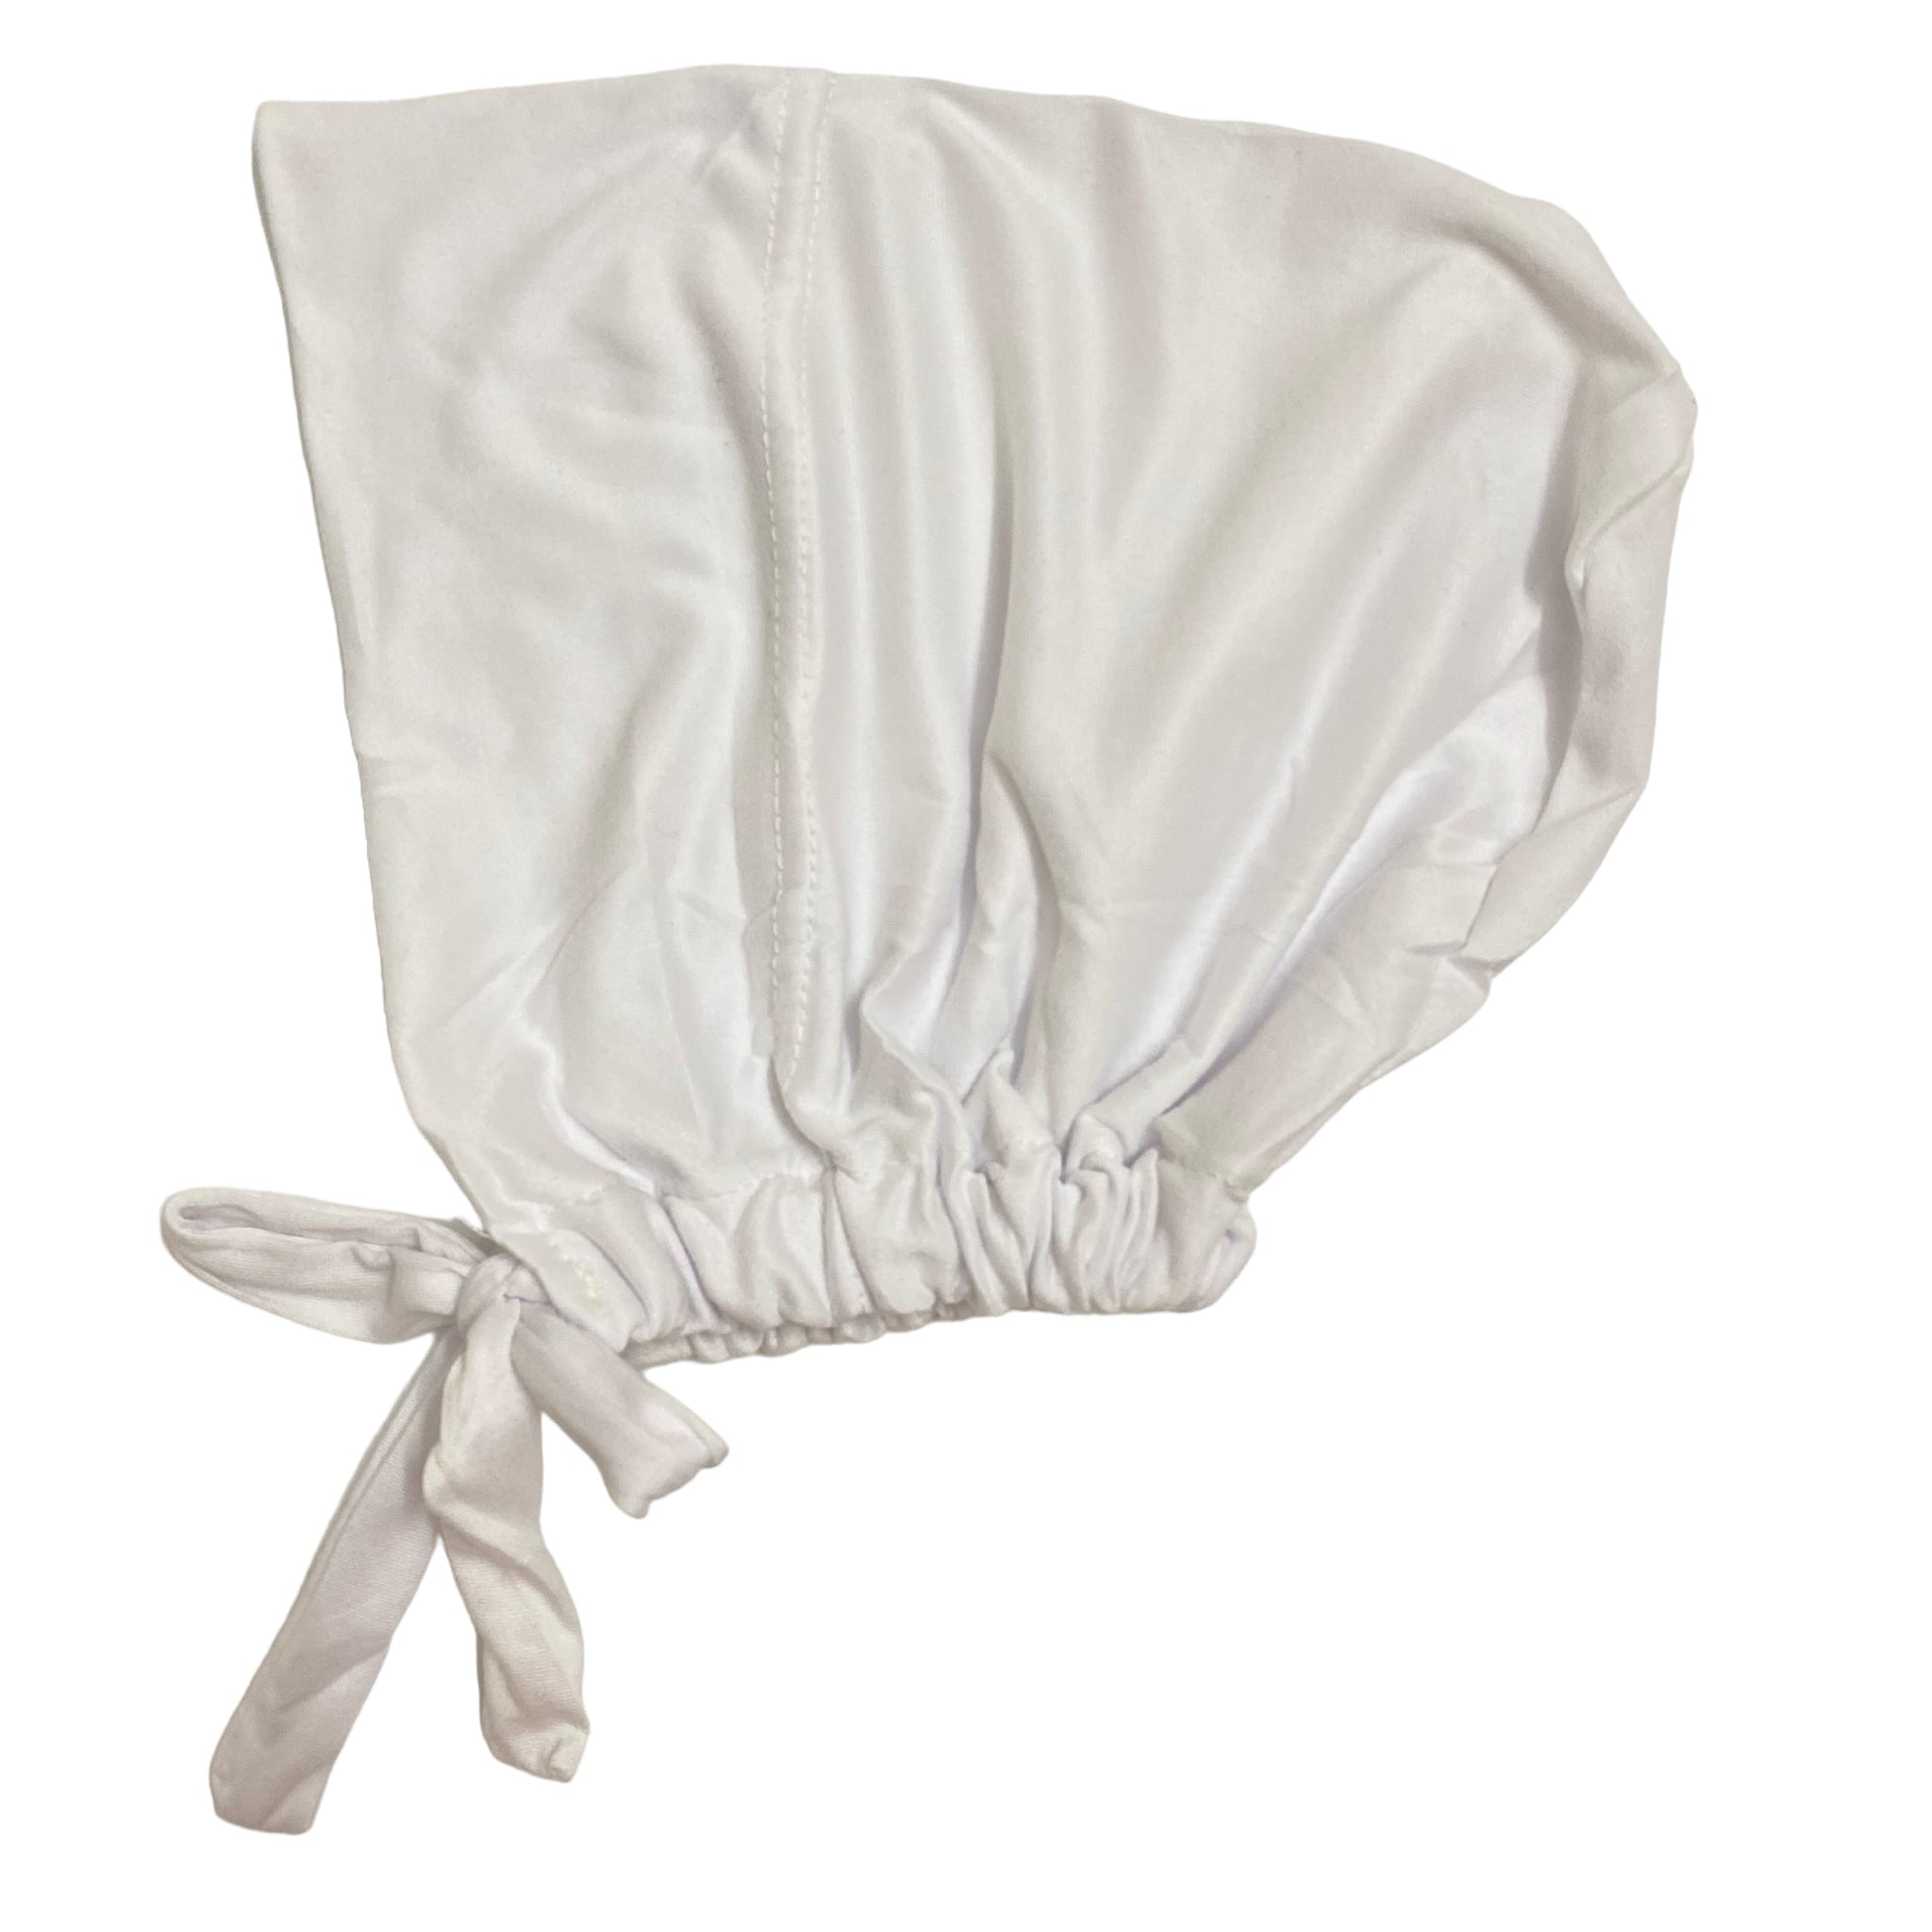 Imported Tie back Full Covered Hijab Cap – White